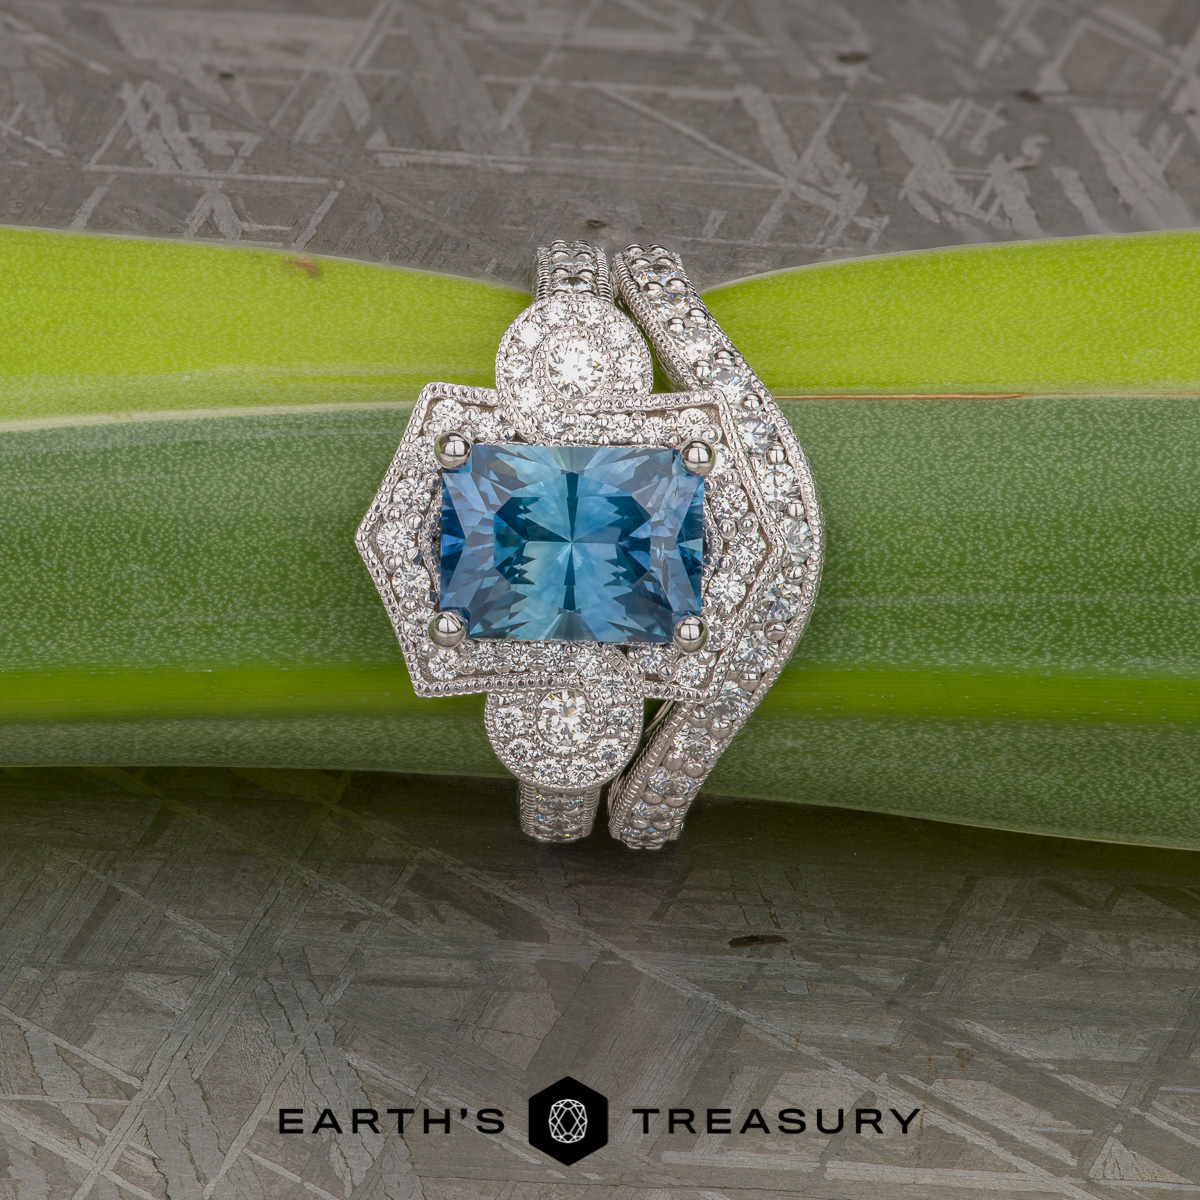 A studio shot featuring a custom vintage-inspired ring set with a large rectangular Montana sapphire